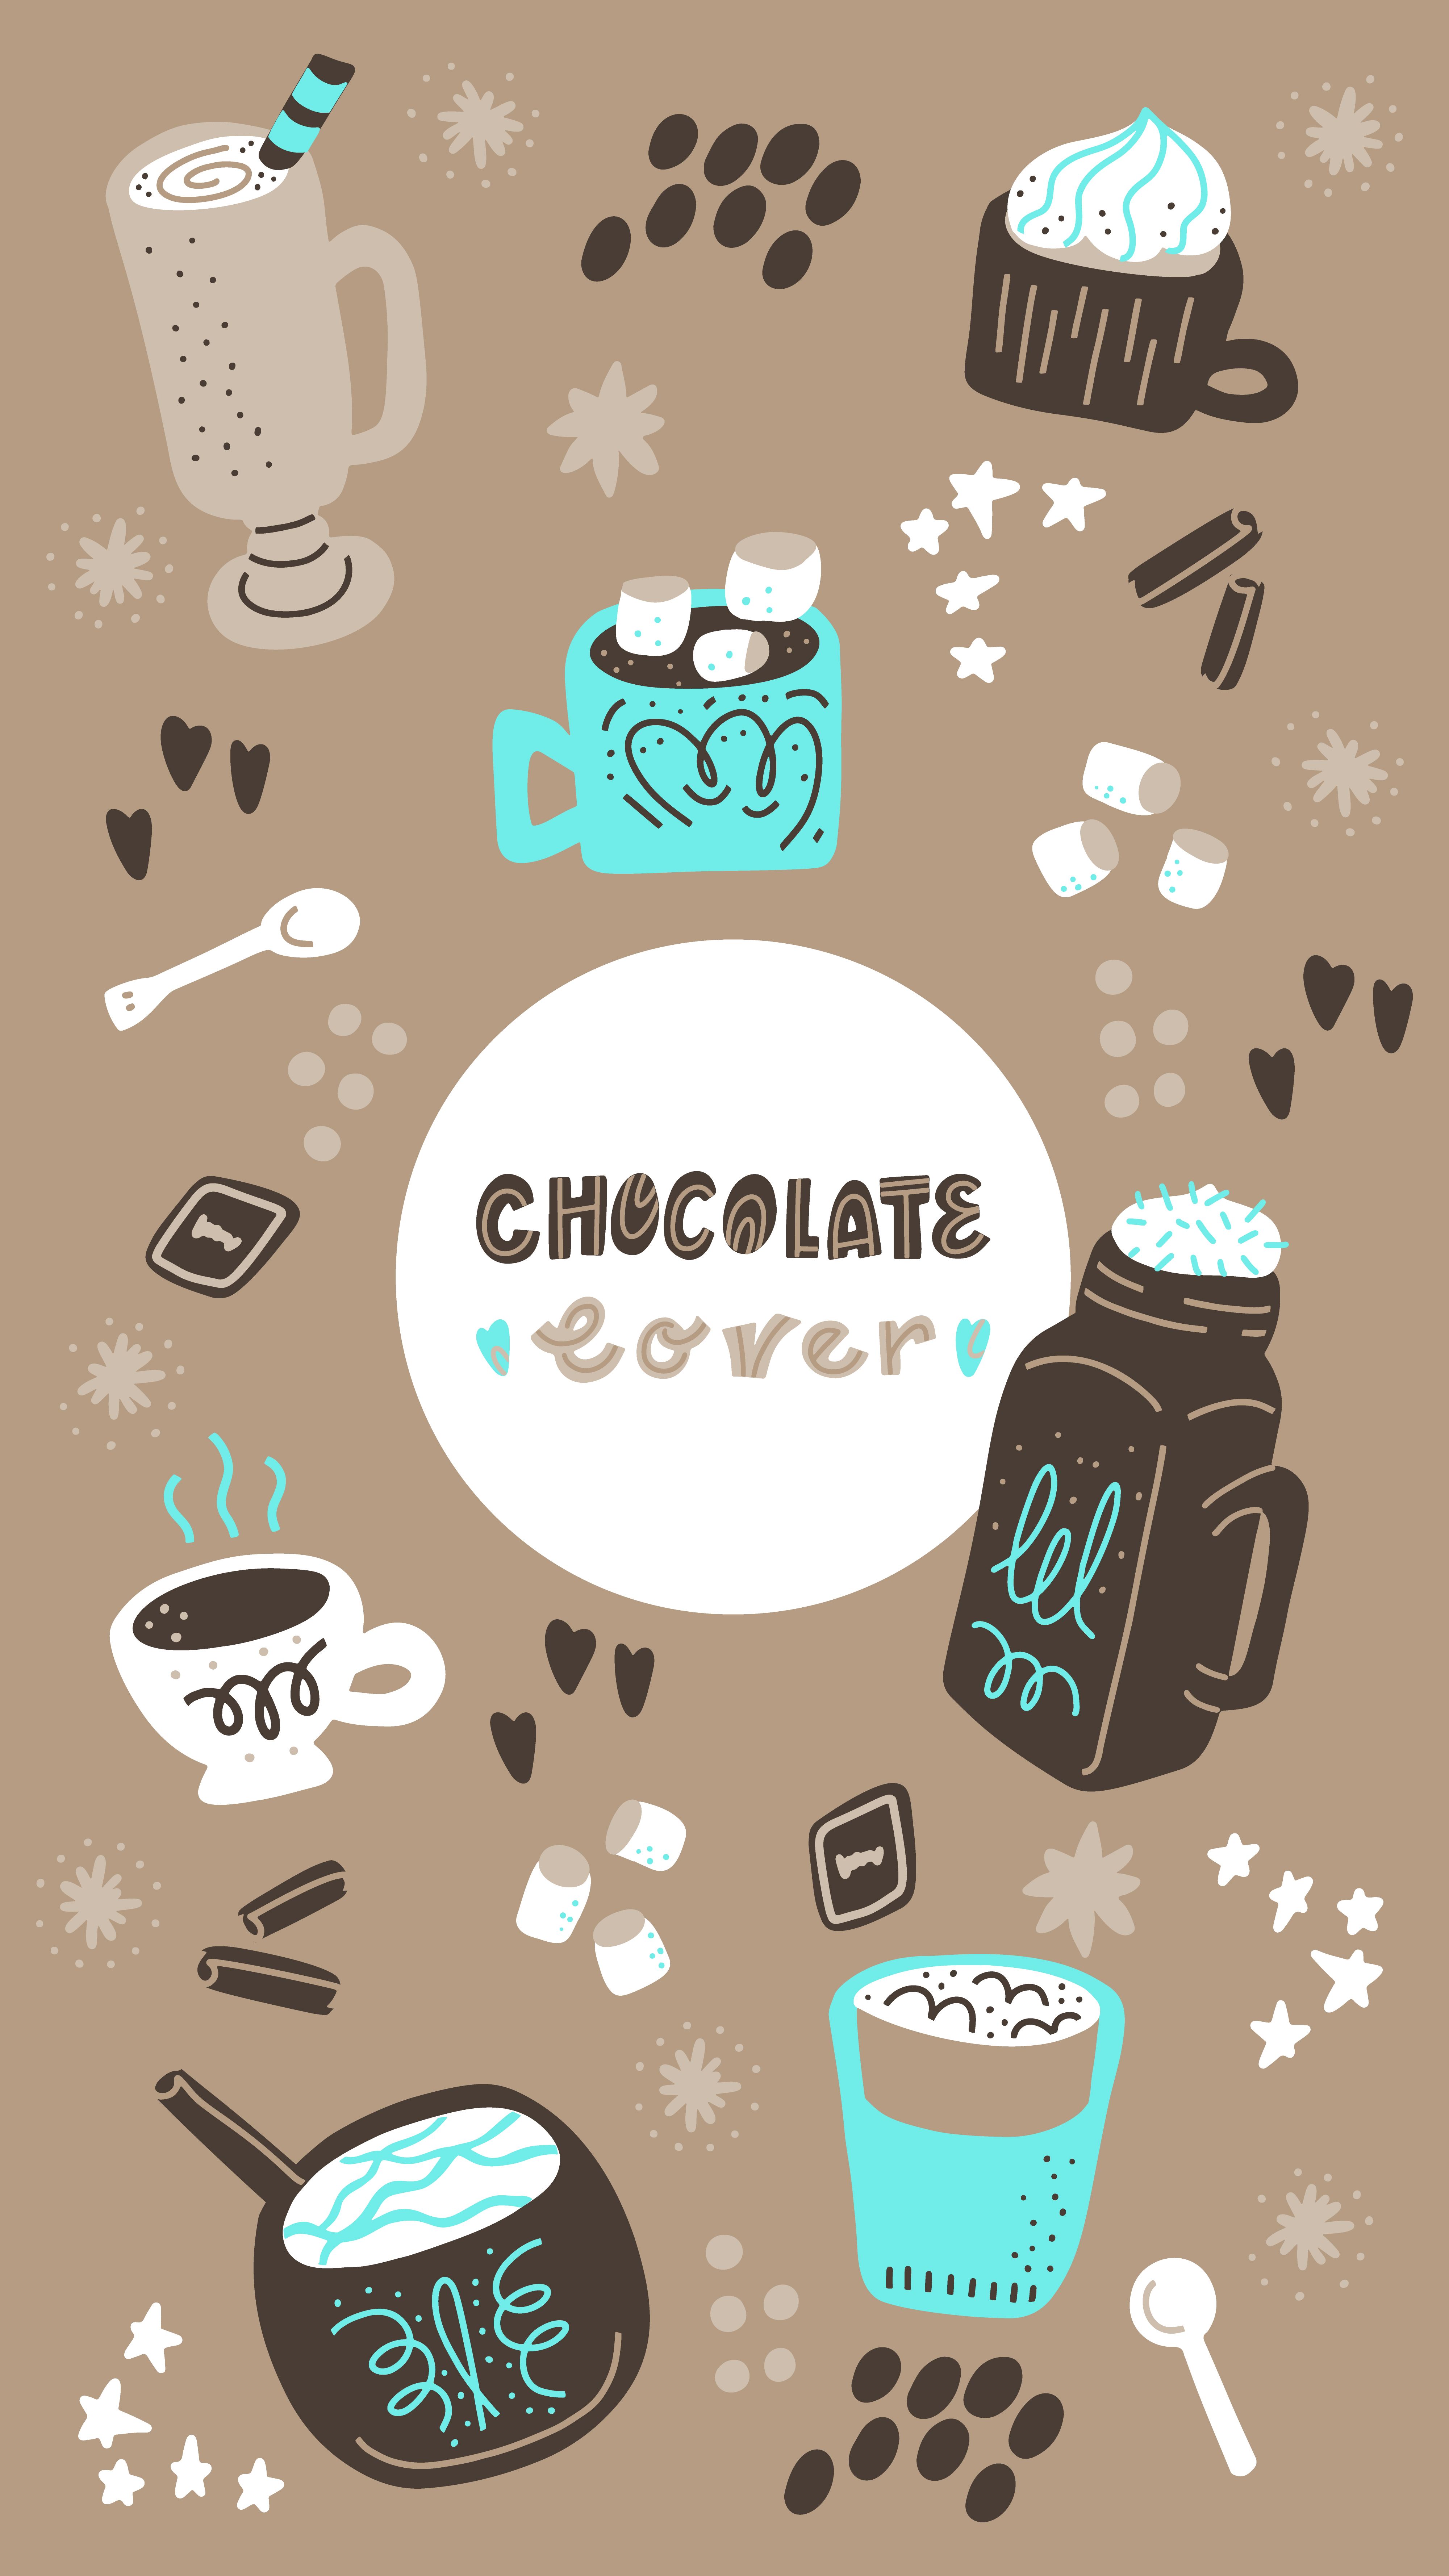 A card with hot chocolate and marshmallows - Chocolate